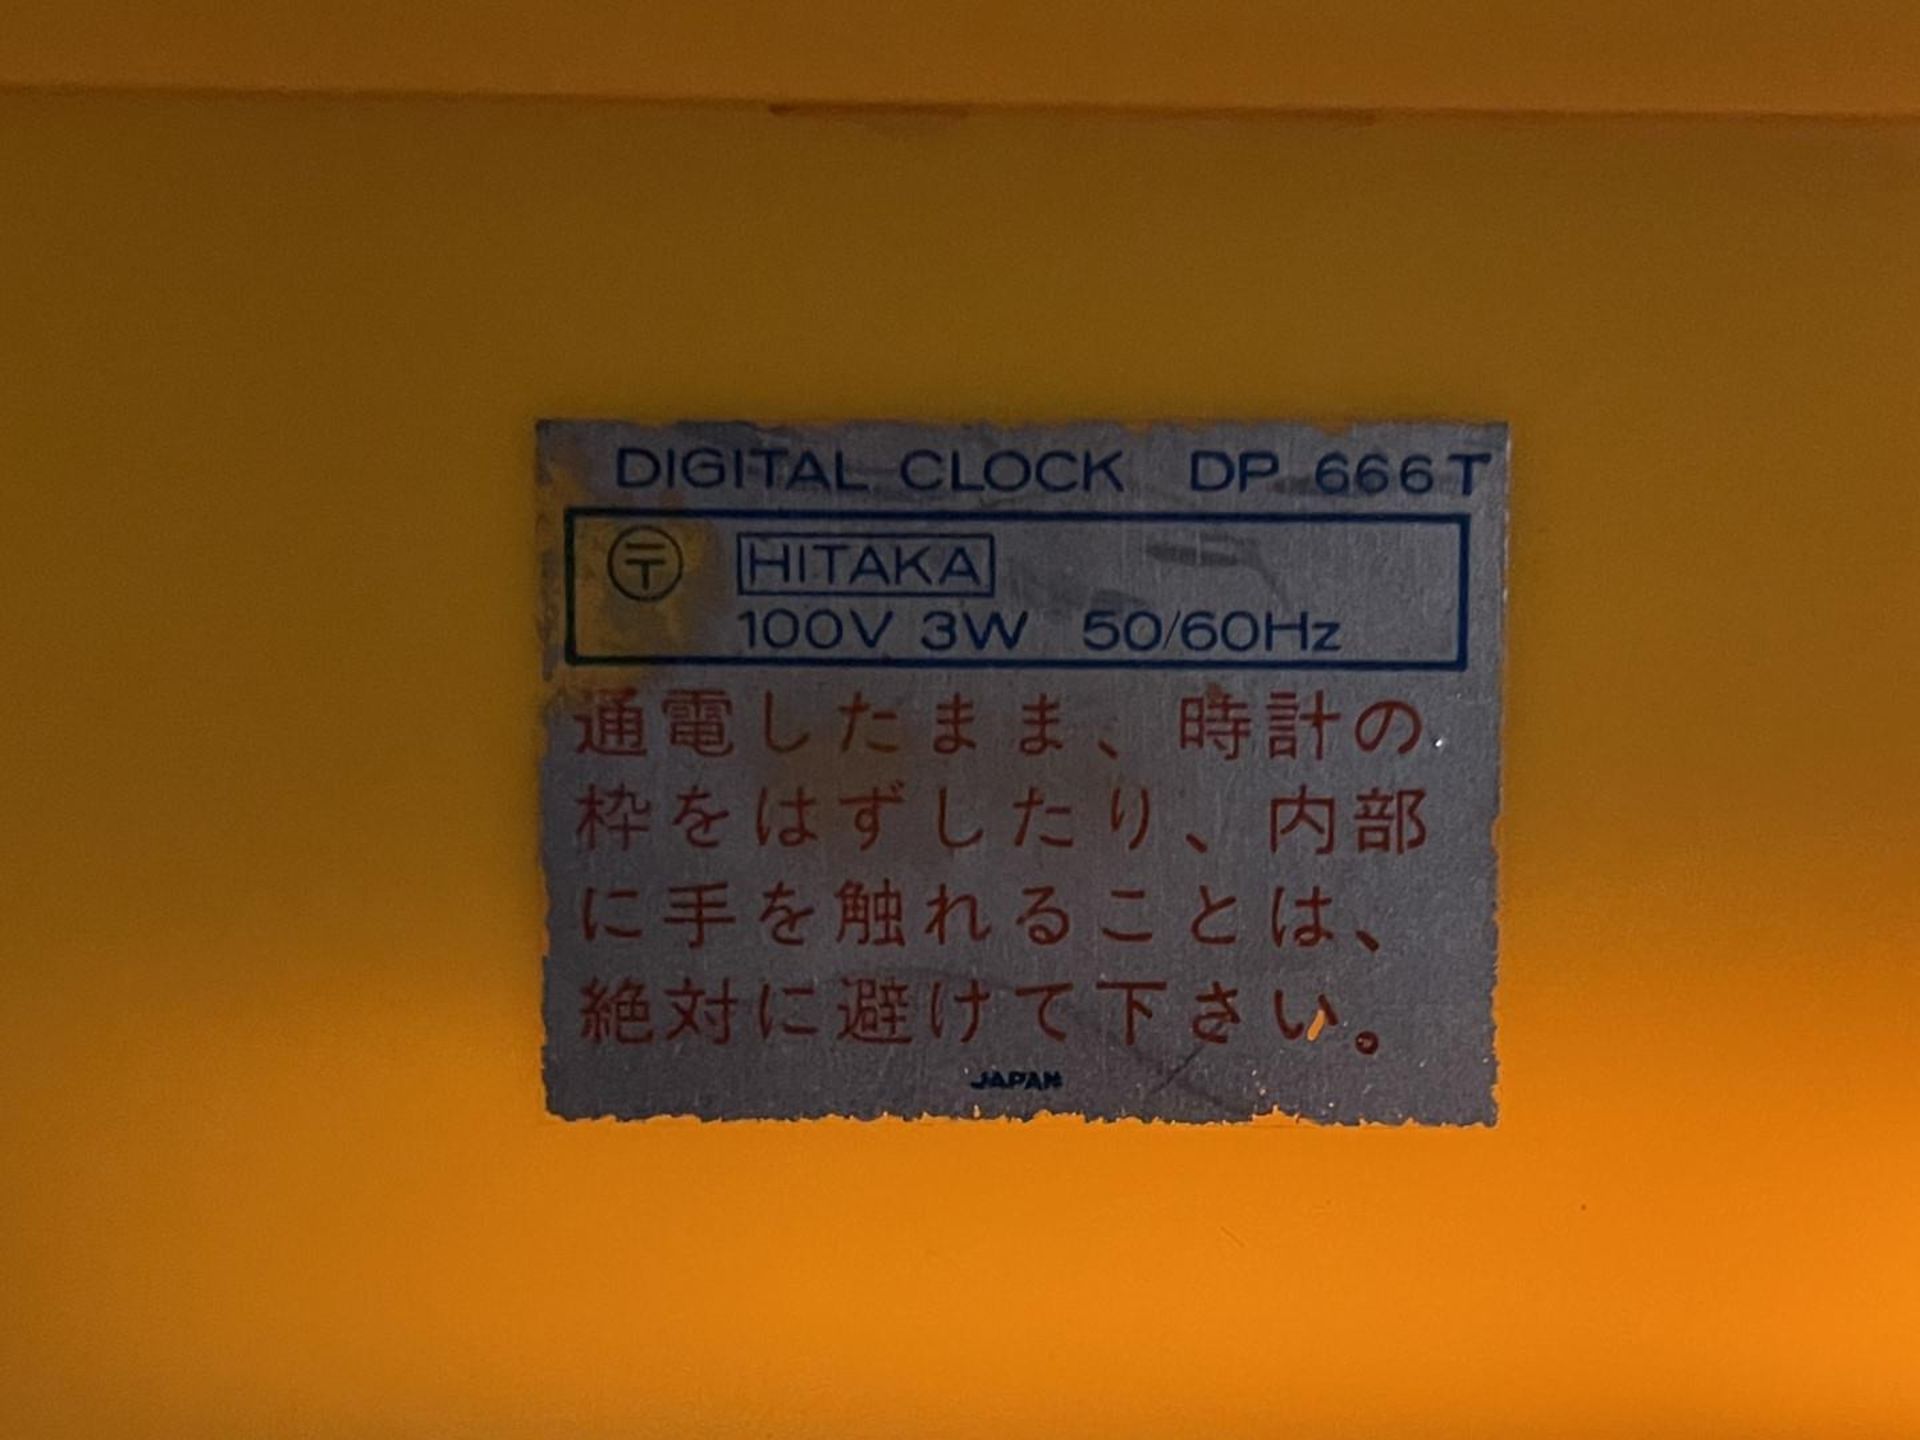 1 x Vintage Japanese Seiko DP666T Digital Flip Alarm Clock With a Yellow Body - Image 5 of 5